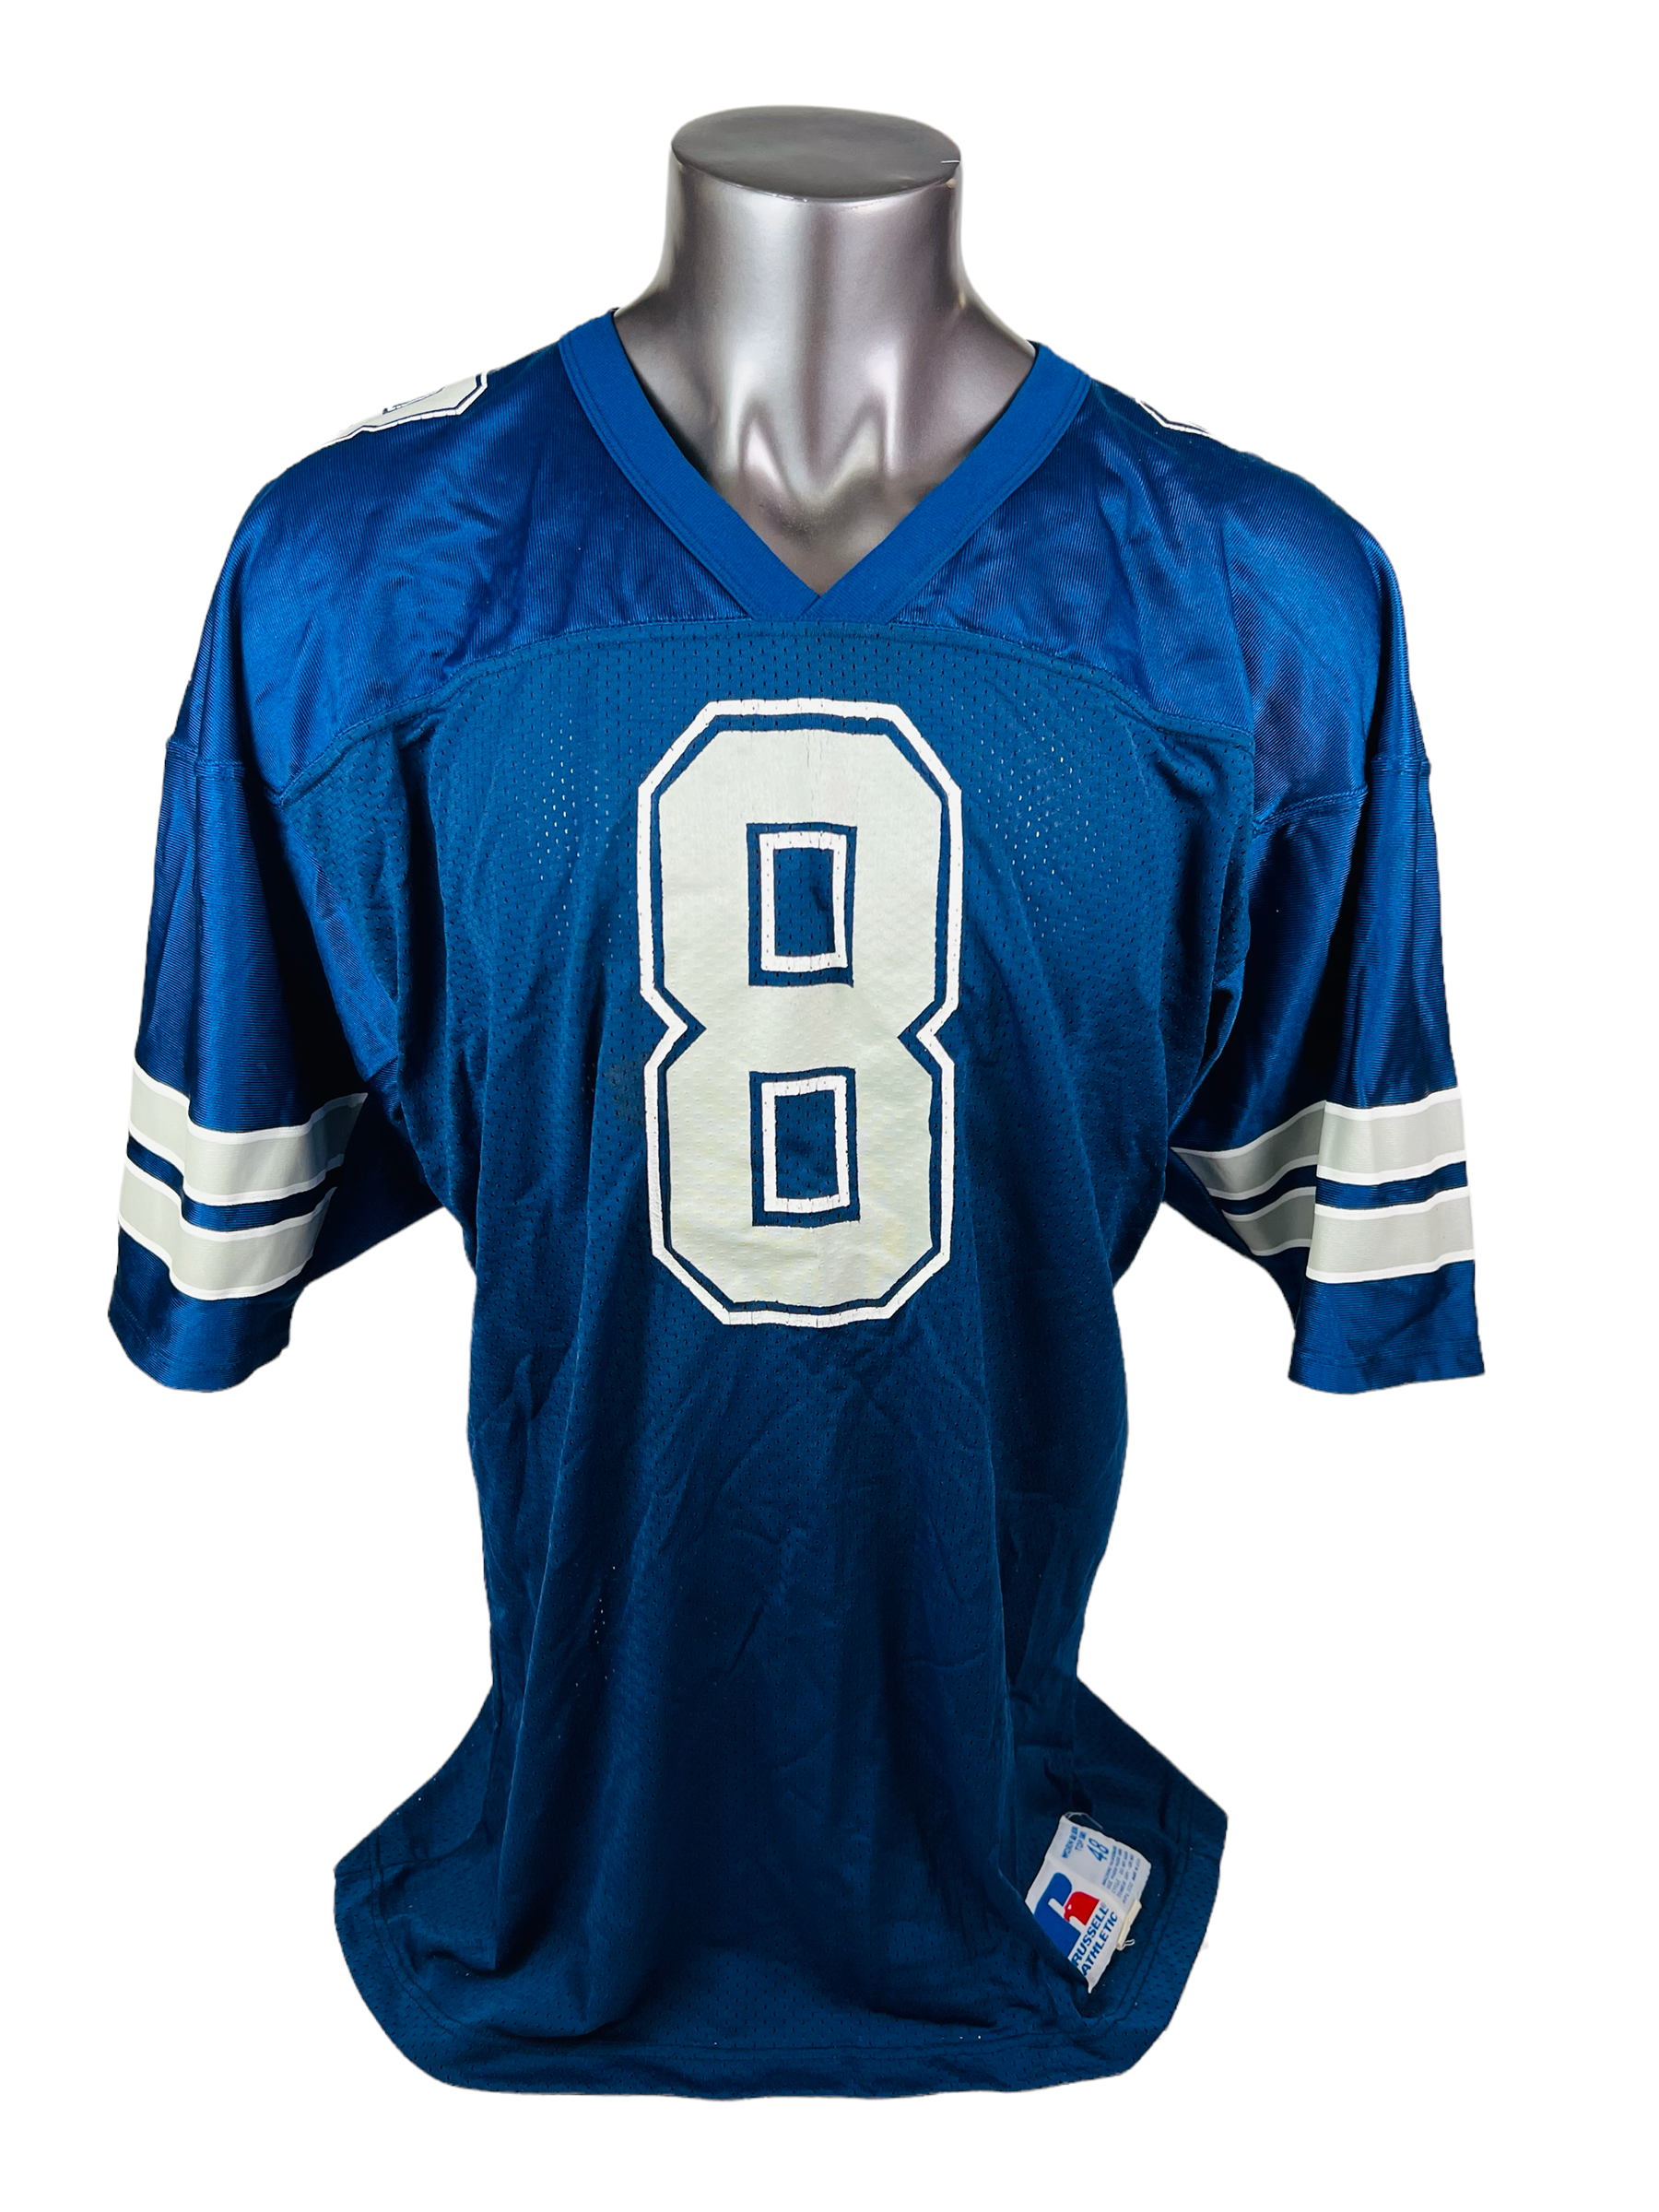 TROY AIKMAN DALLAS COWBOYS VINTAGE 1990'S RUSSELL ATHLETIC JERSEY